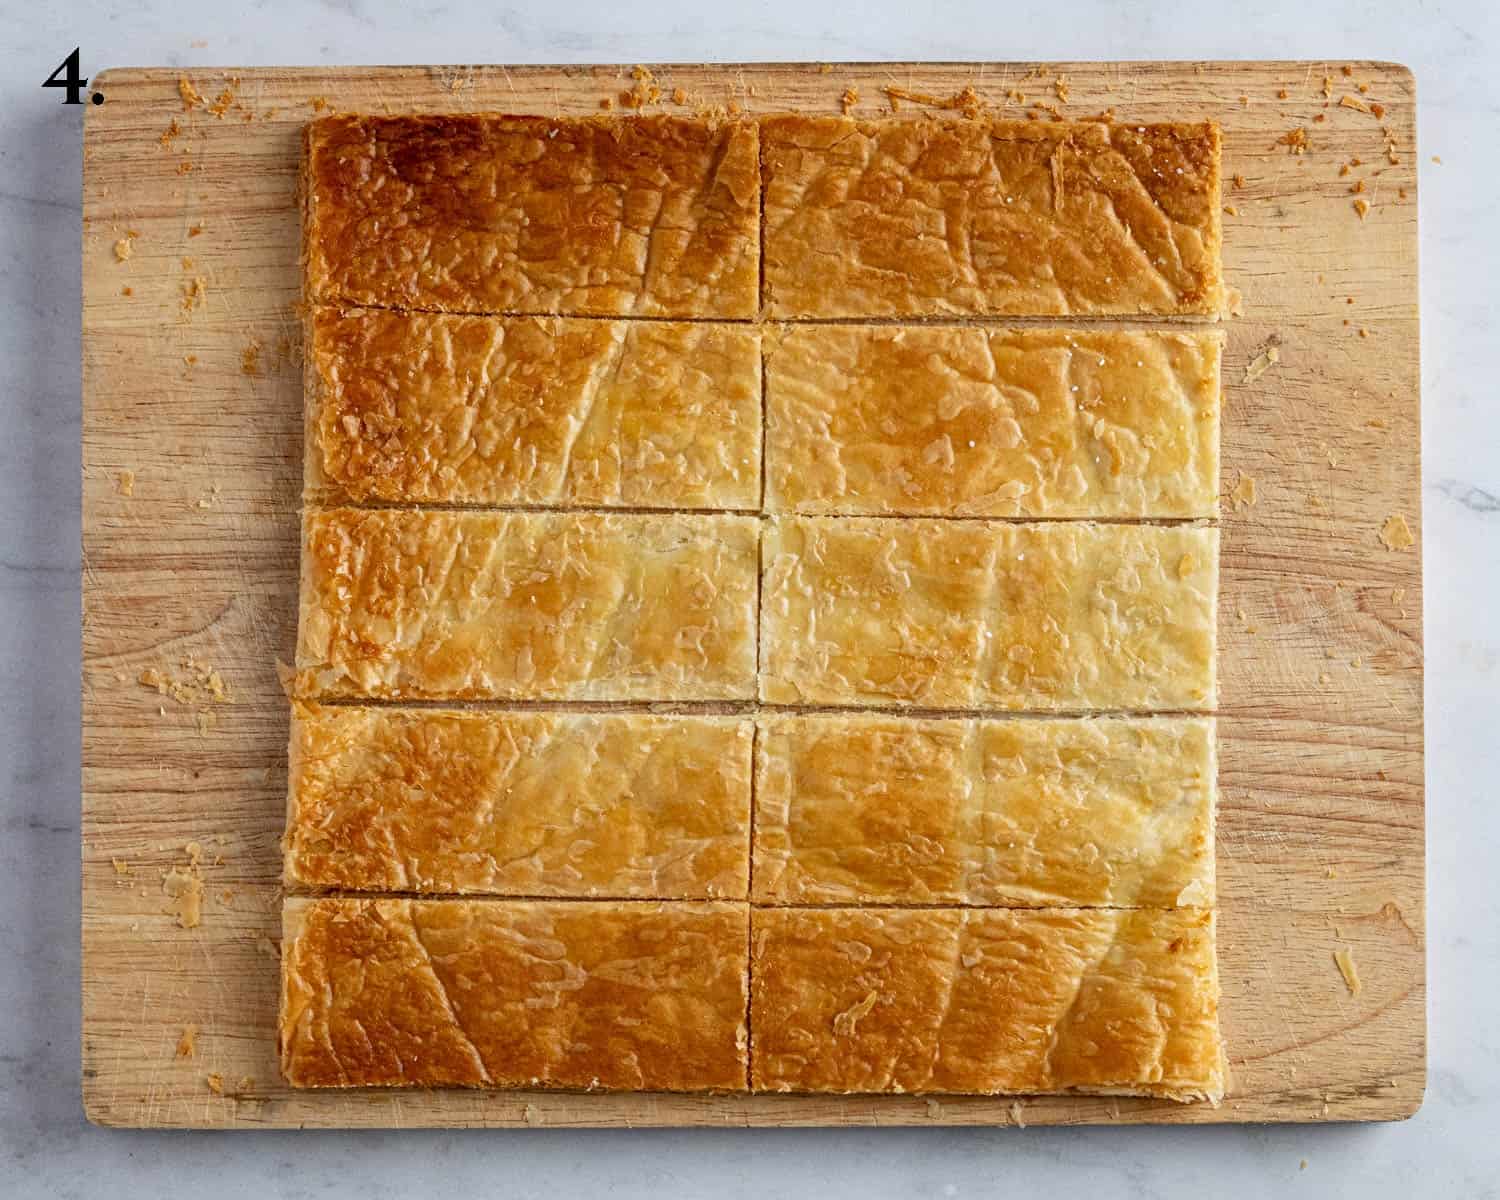 Step 4, the top pastry sheet divided into rectangles.